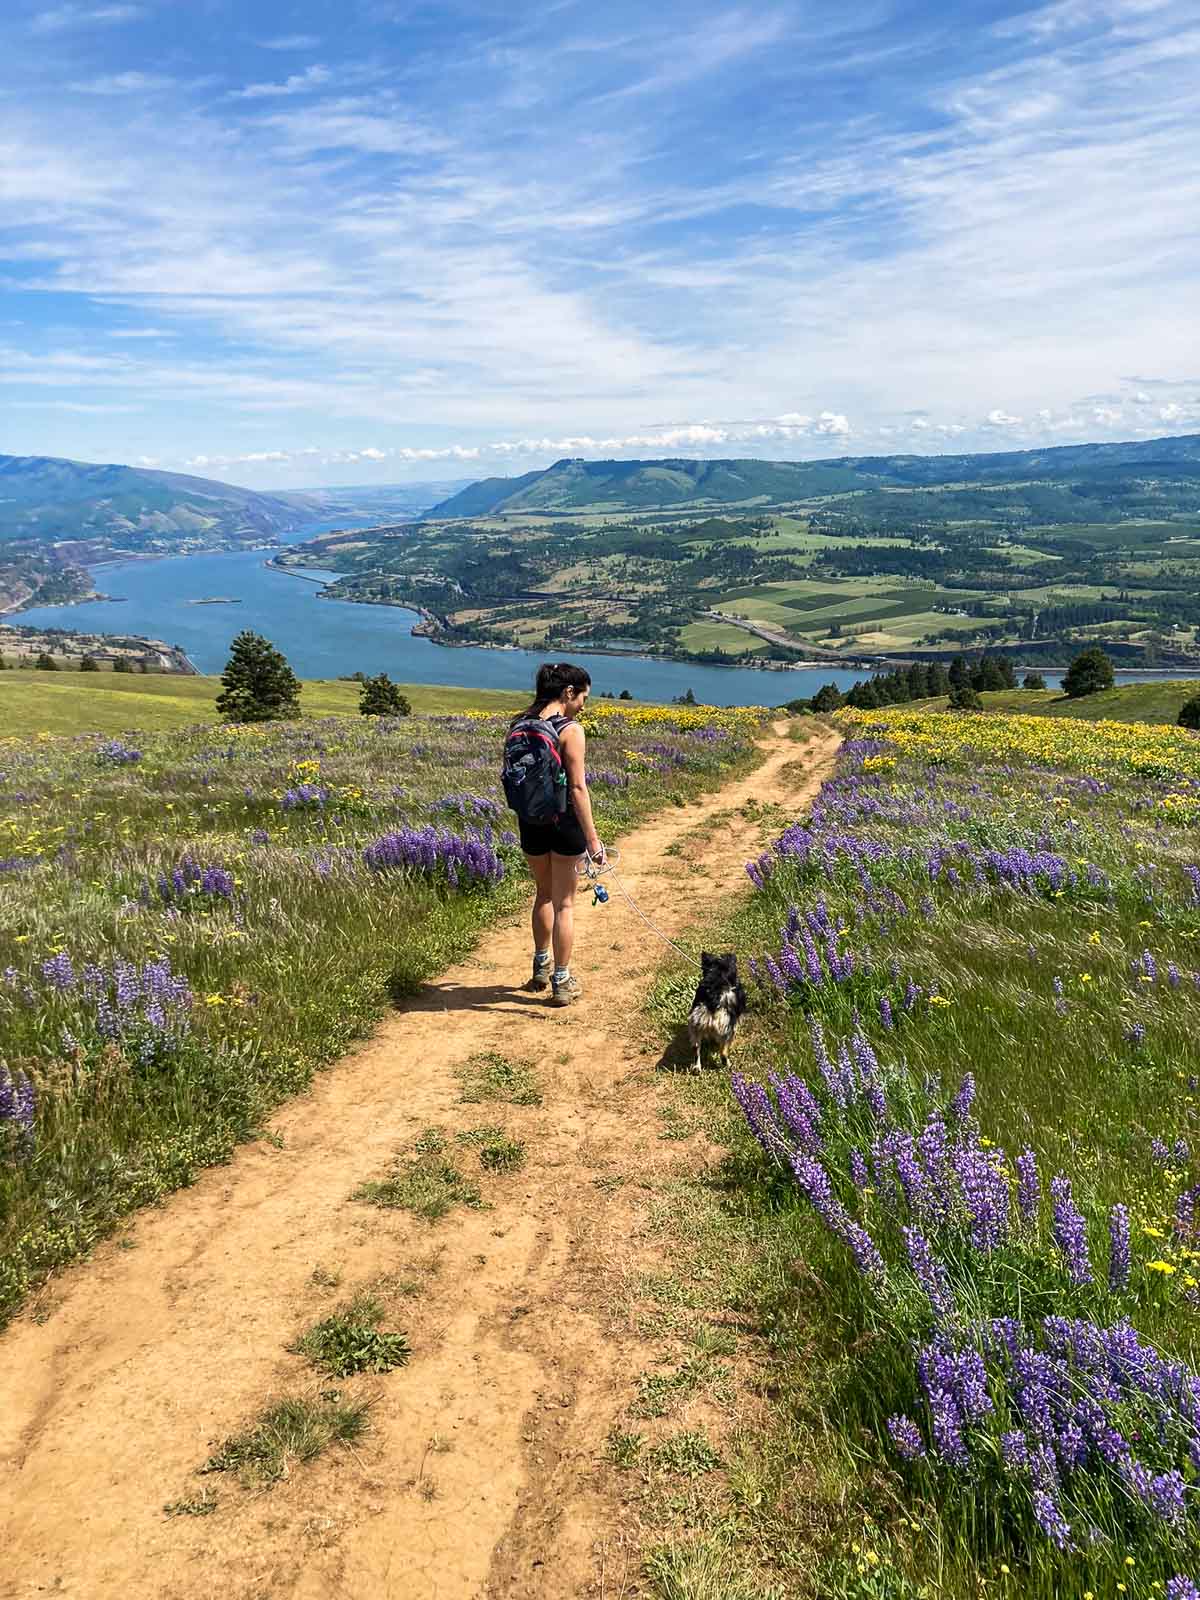 Hiker and dog amid wildflowers on Coyote Wall Trail in Columbia River Gorge, Washington